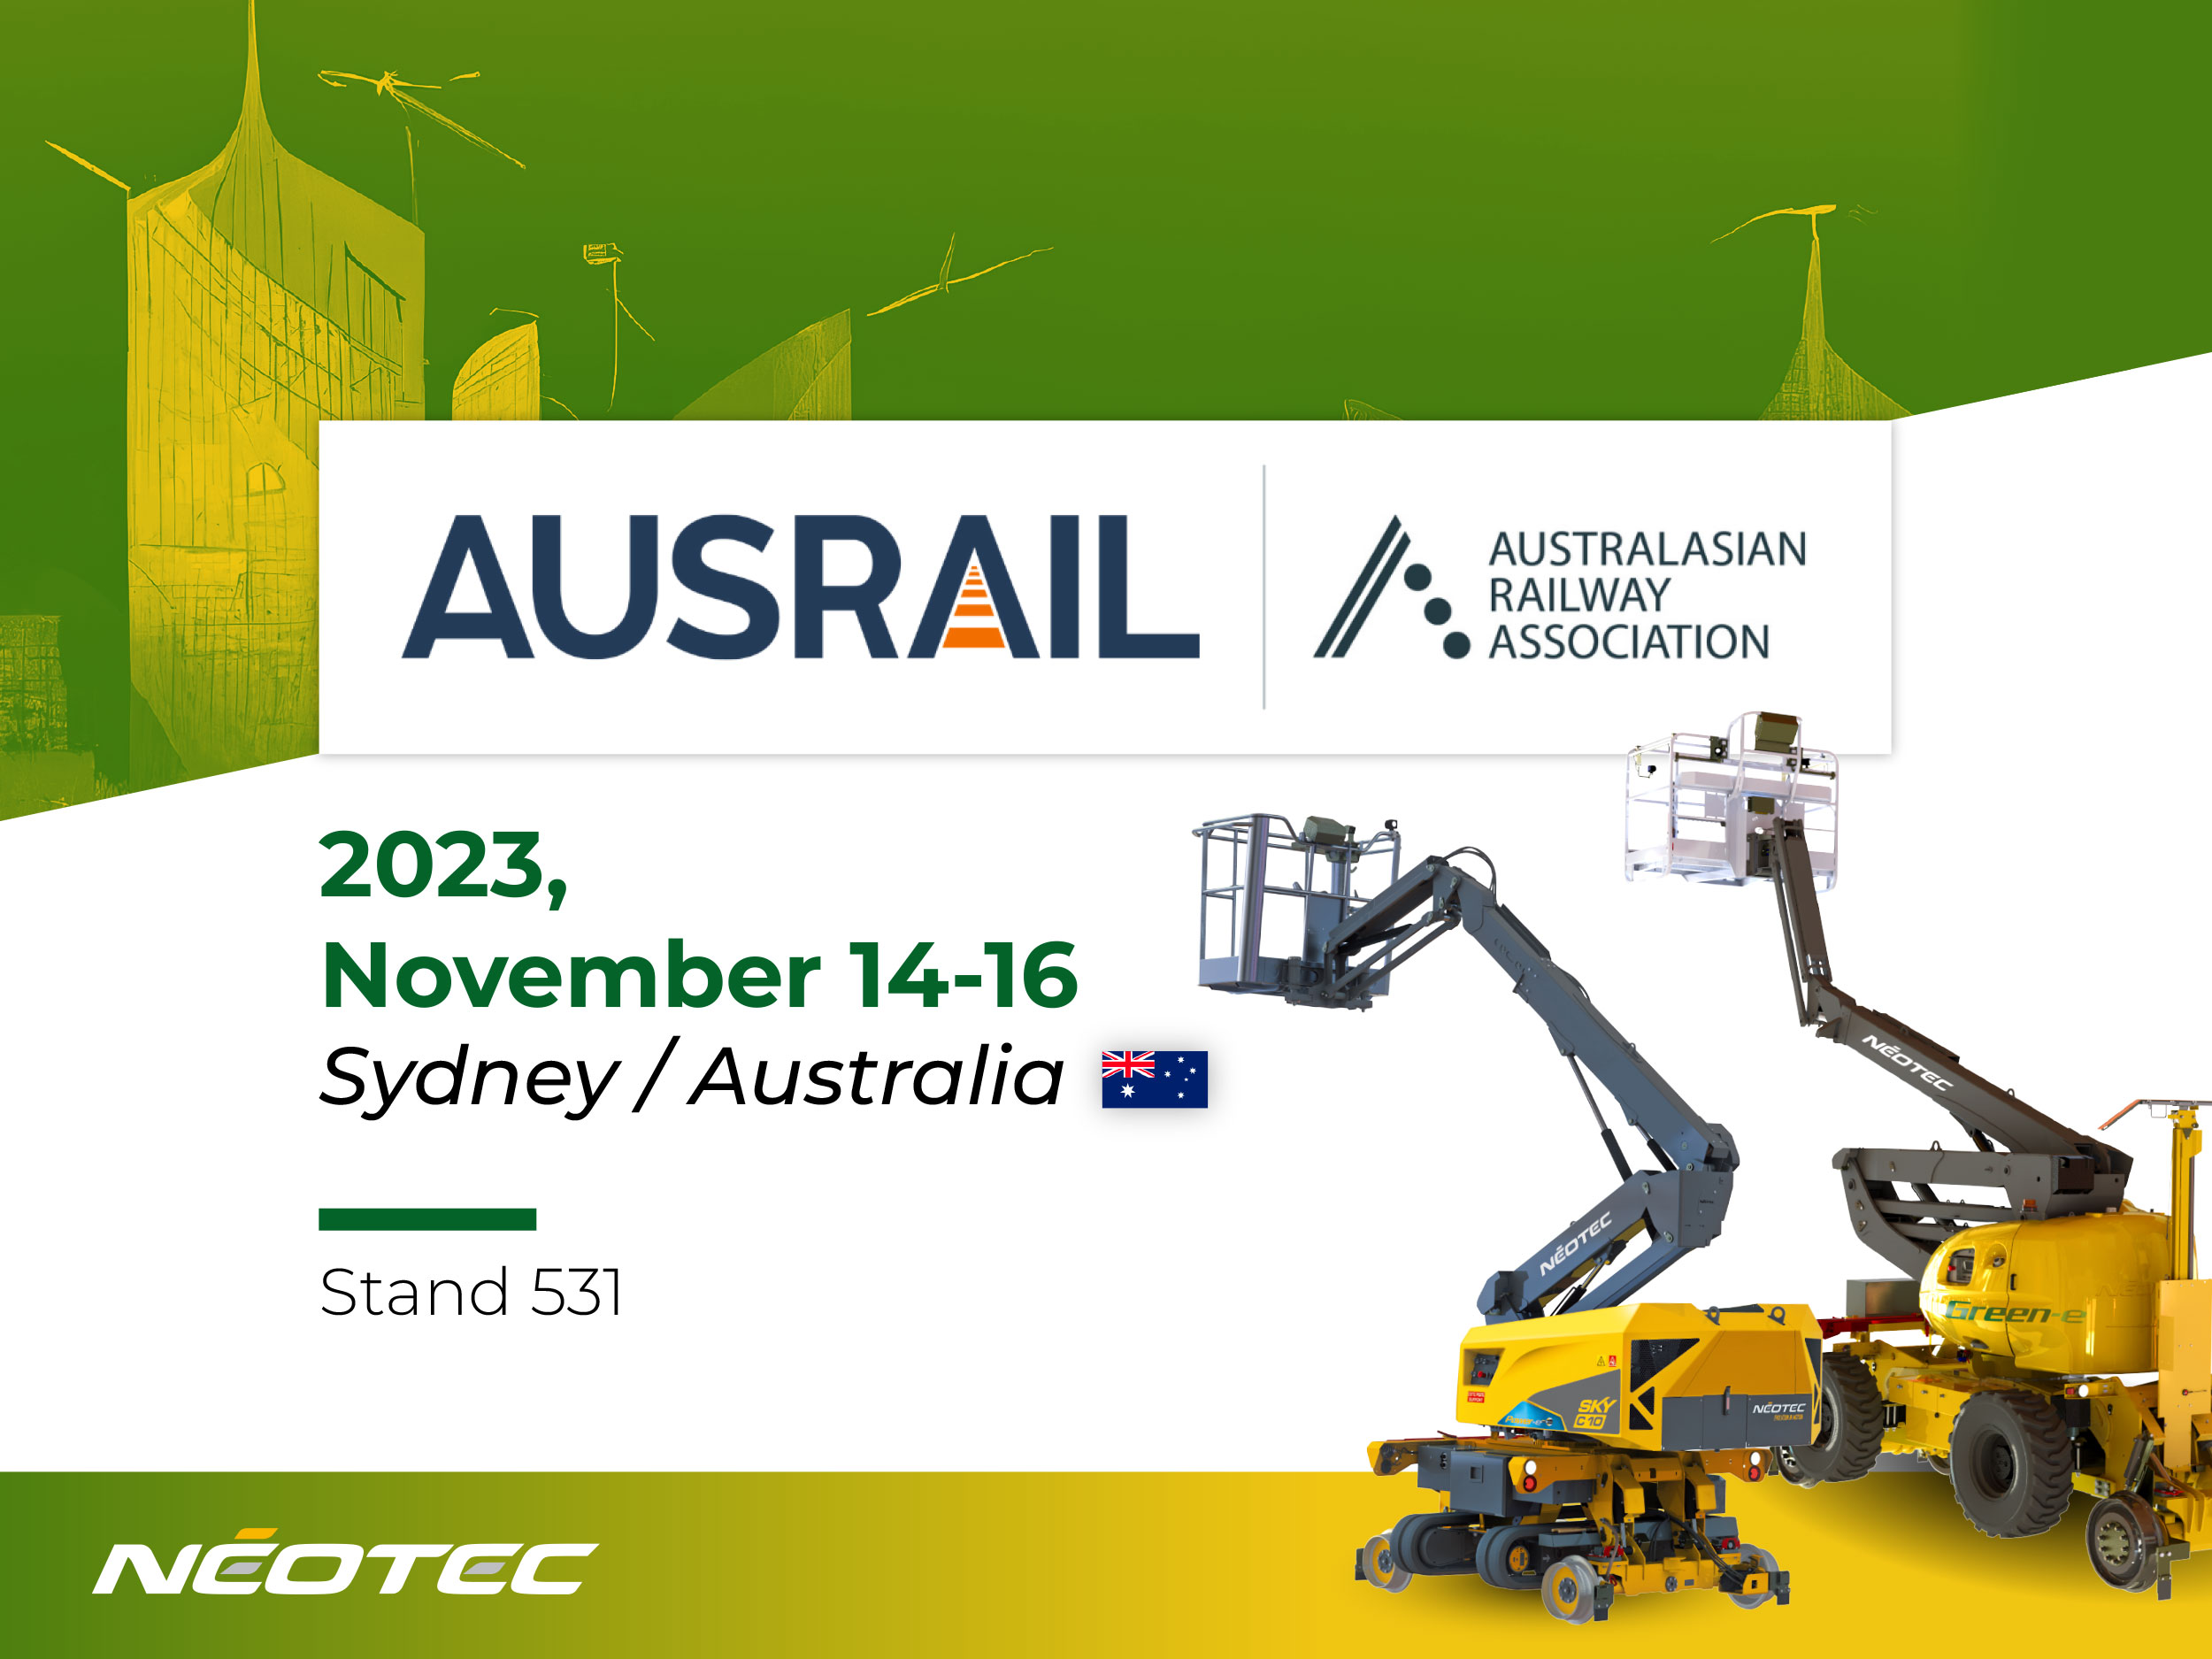 Come and visit Neotec at Ausrail 2023!